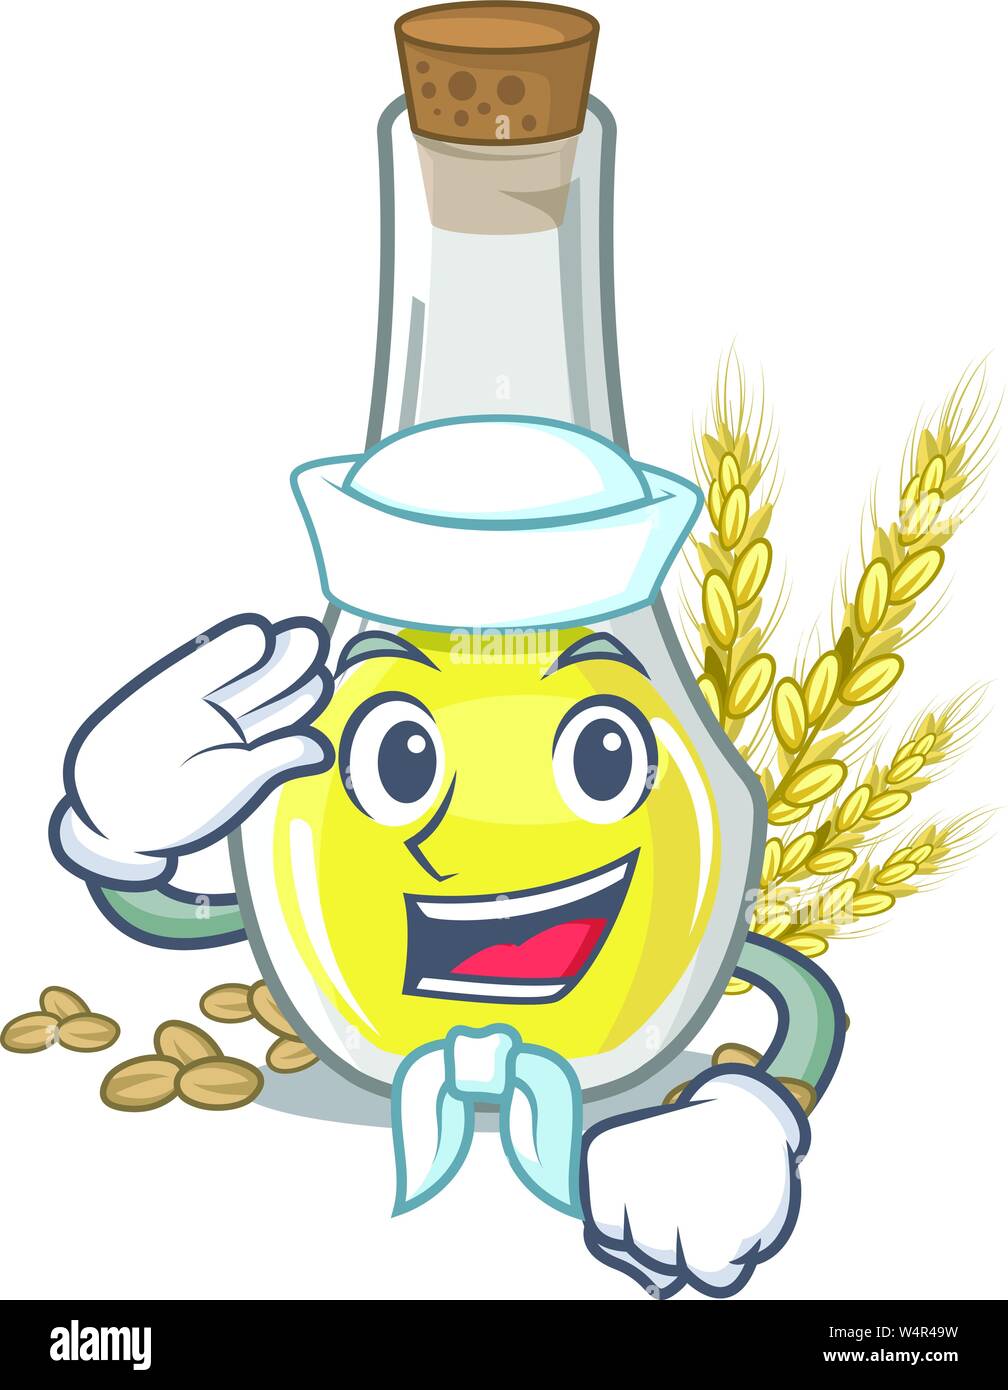 Sailor wheat germ oil with isolated character vector illustration Stock Vector